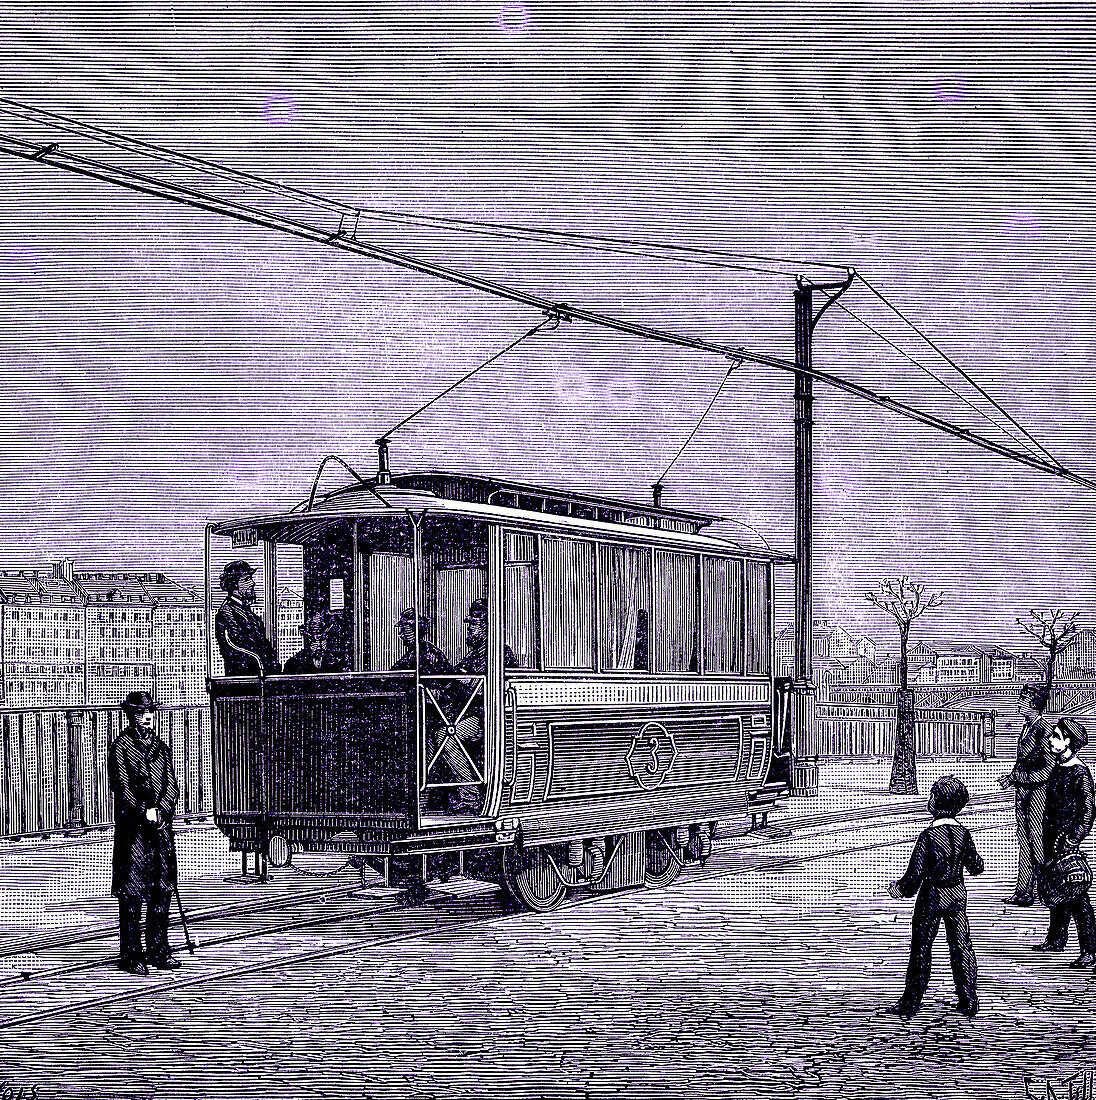 Electric tramway, Germany, 19th century illustration